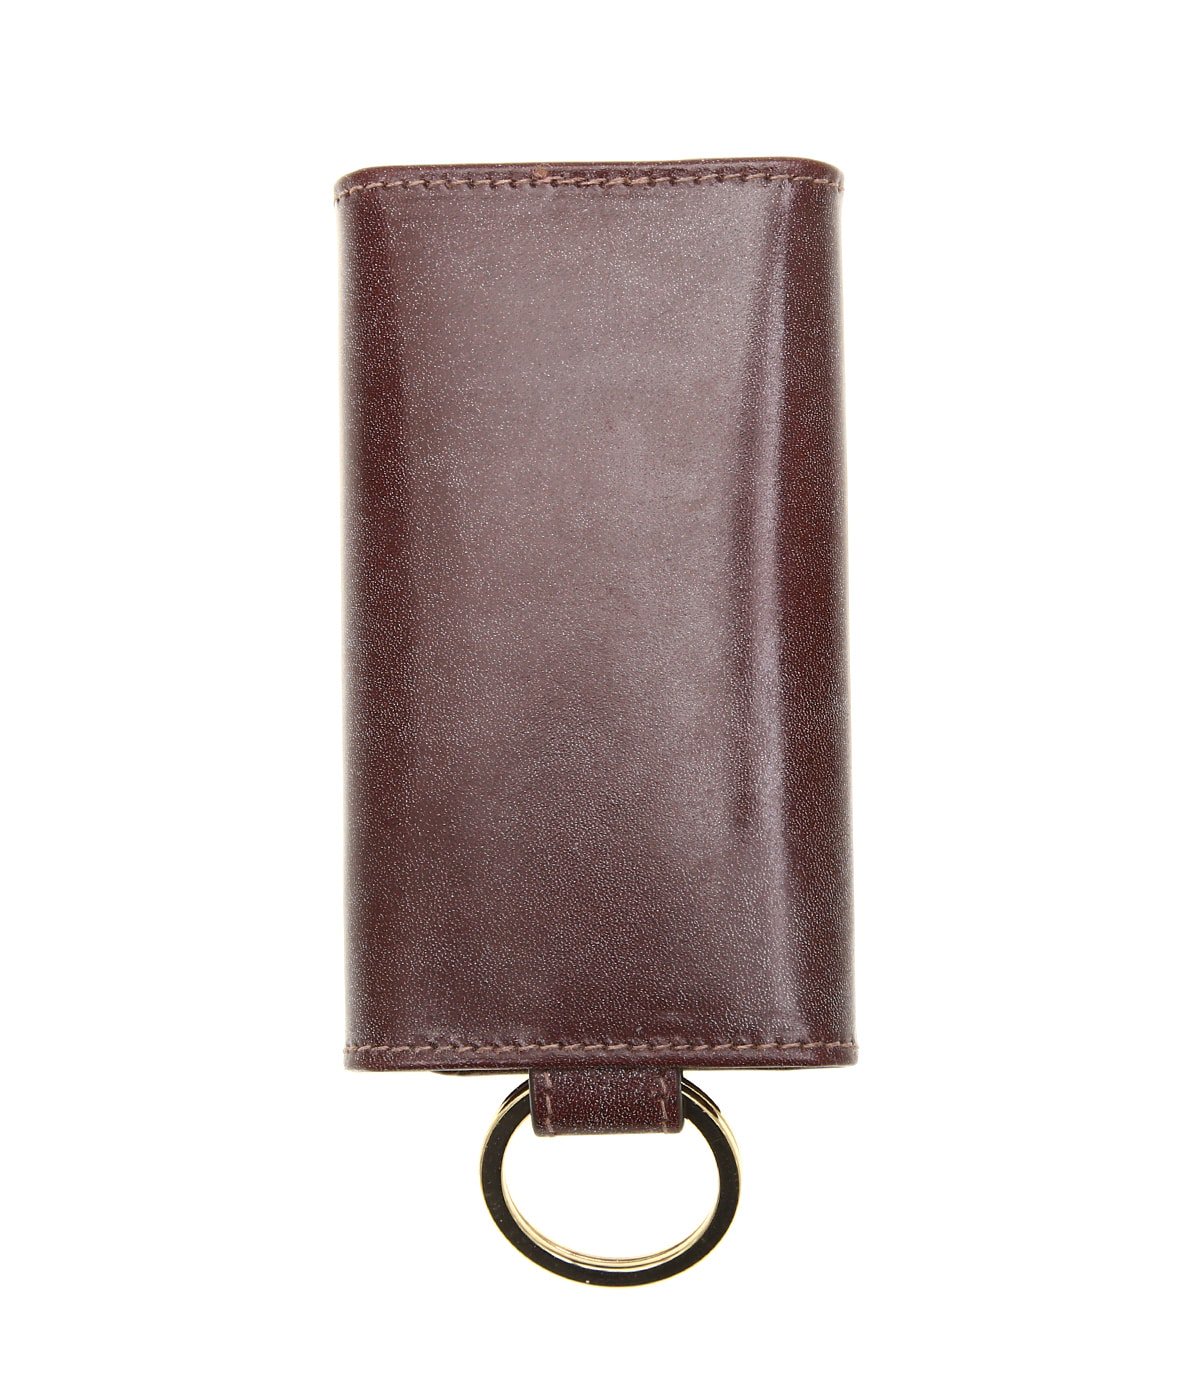 KEYCASE(ANTIQUE×Bridle Leather Collection) | Whitehouse Cox 